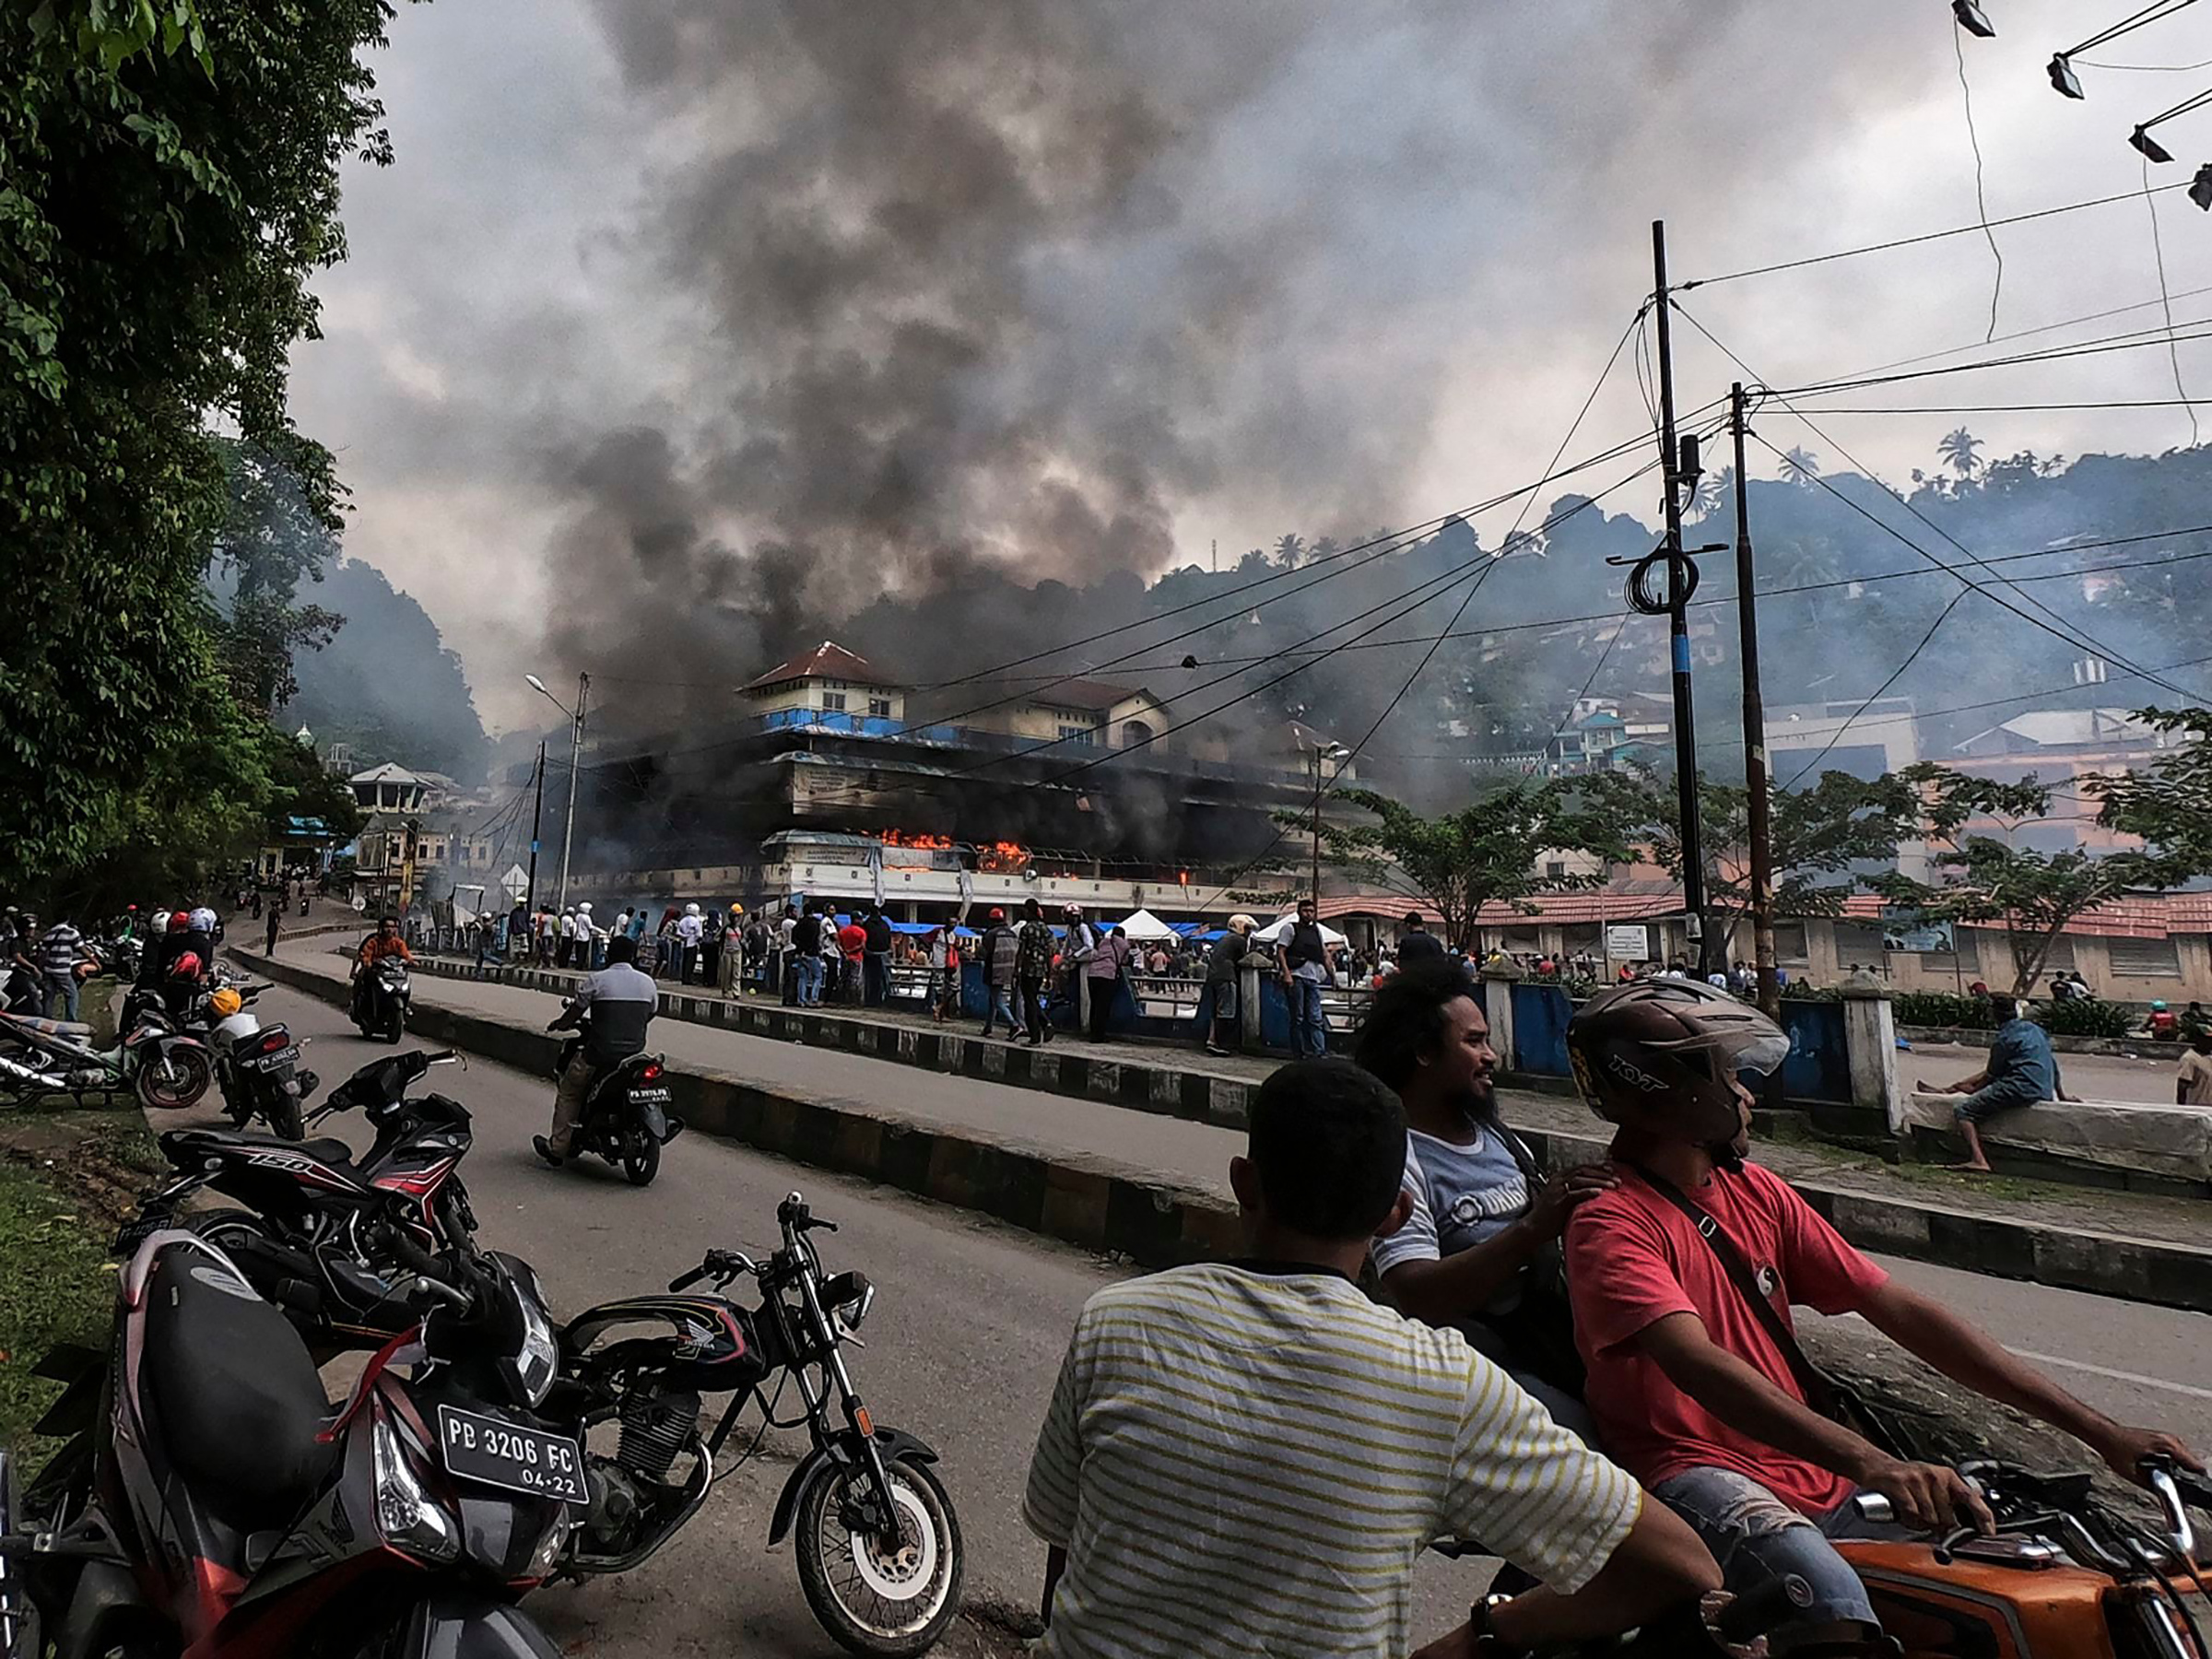 Papuans gather outside the burning Buruni market in Fakfak, West Papua, after it was torched by protesters on Aug. 2019 as unrest triggered by accusations that security insulted Papuan students in Surabaya continued (Beawiharta—EPA-EFE/Shutterstock)